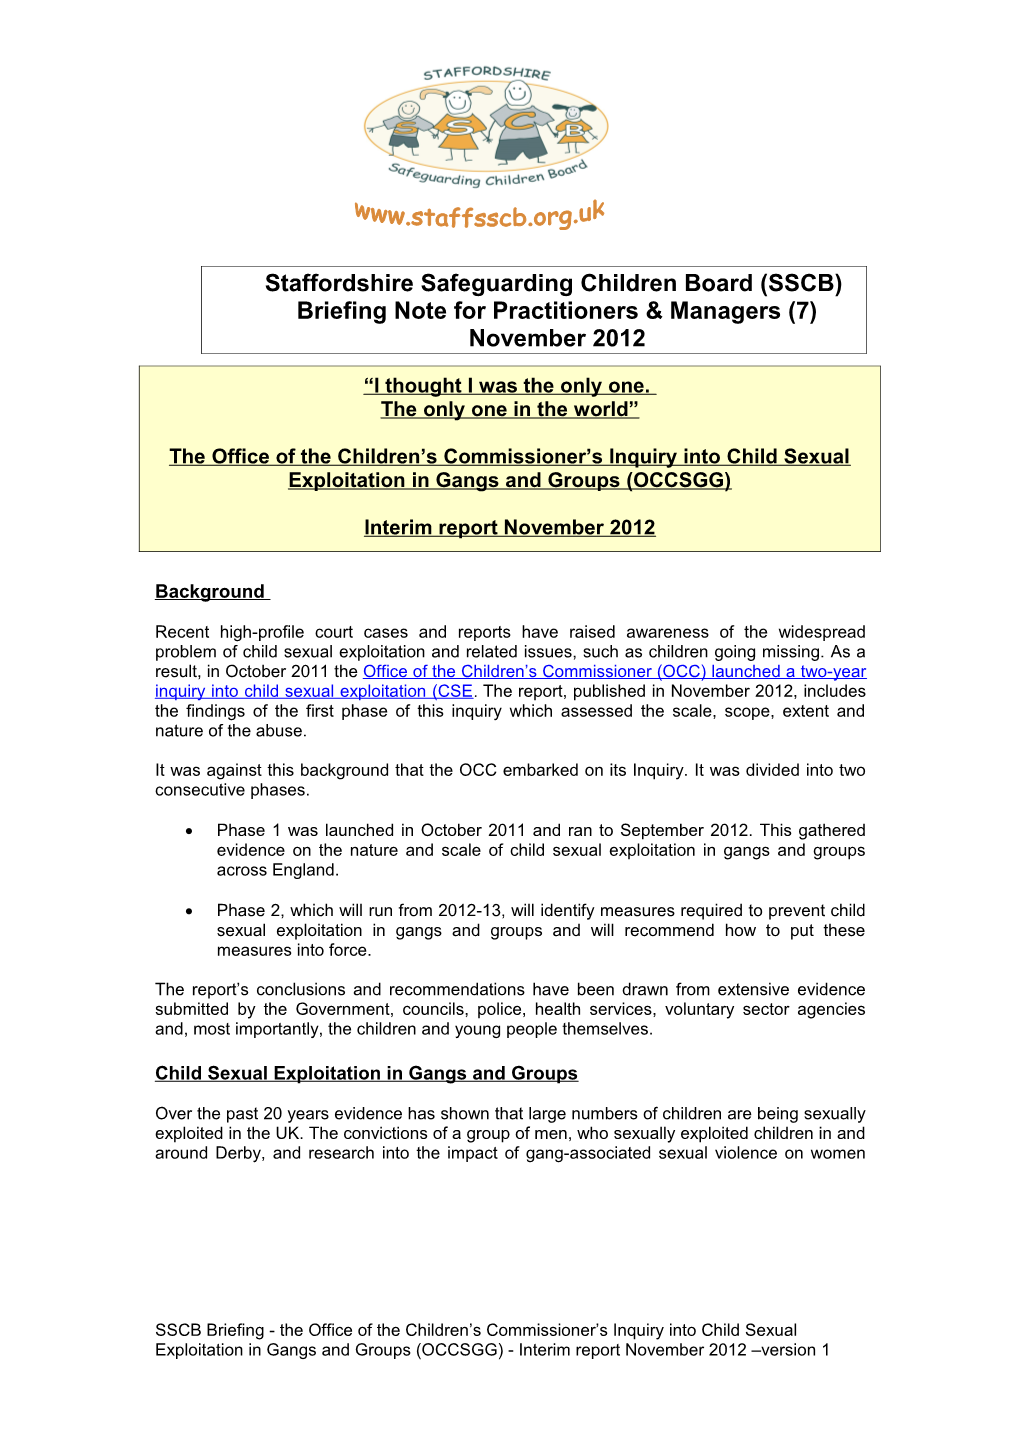 SSCB Briefing 7 CSE in Gangs and Groups Exec Summary November 2012